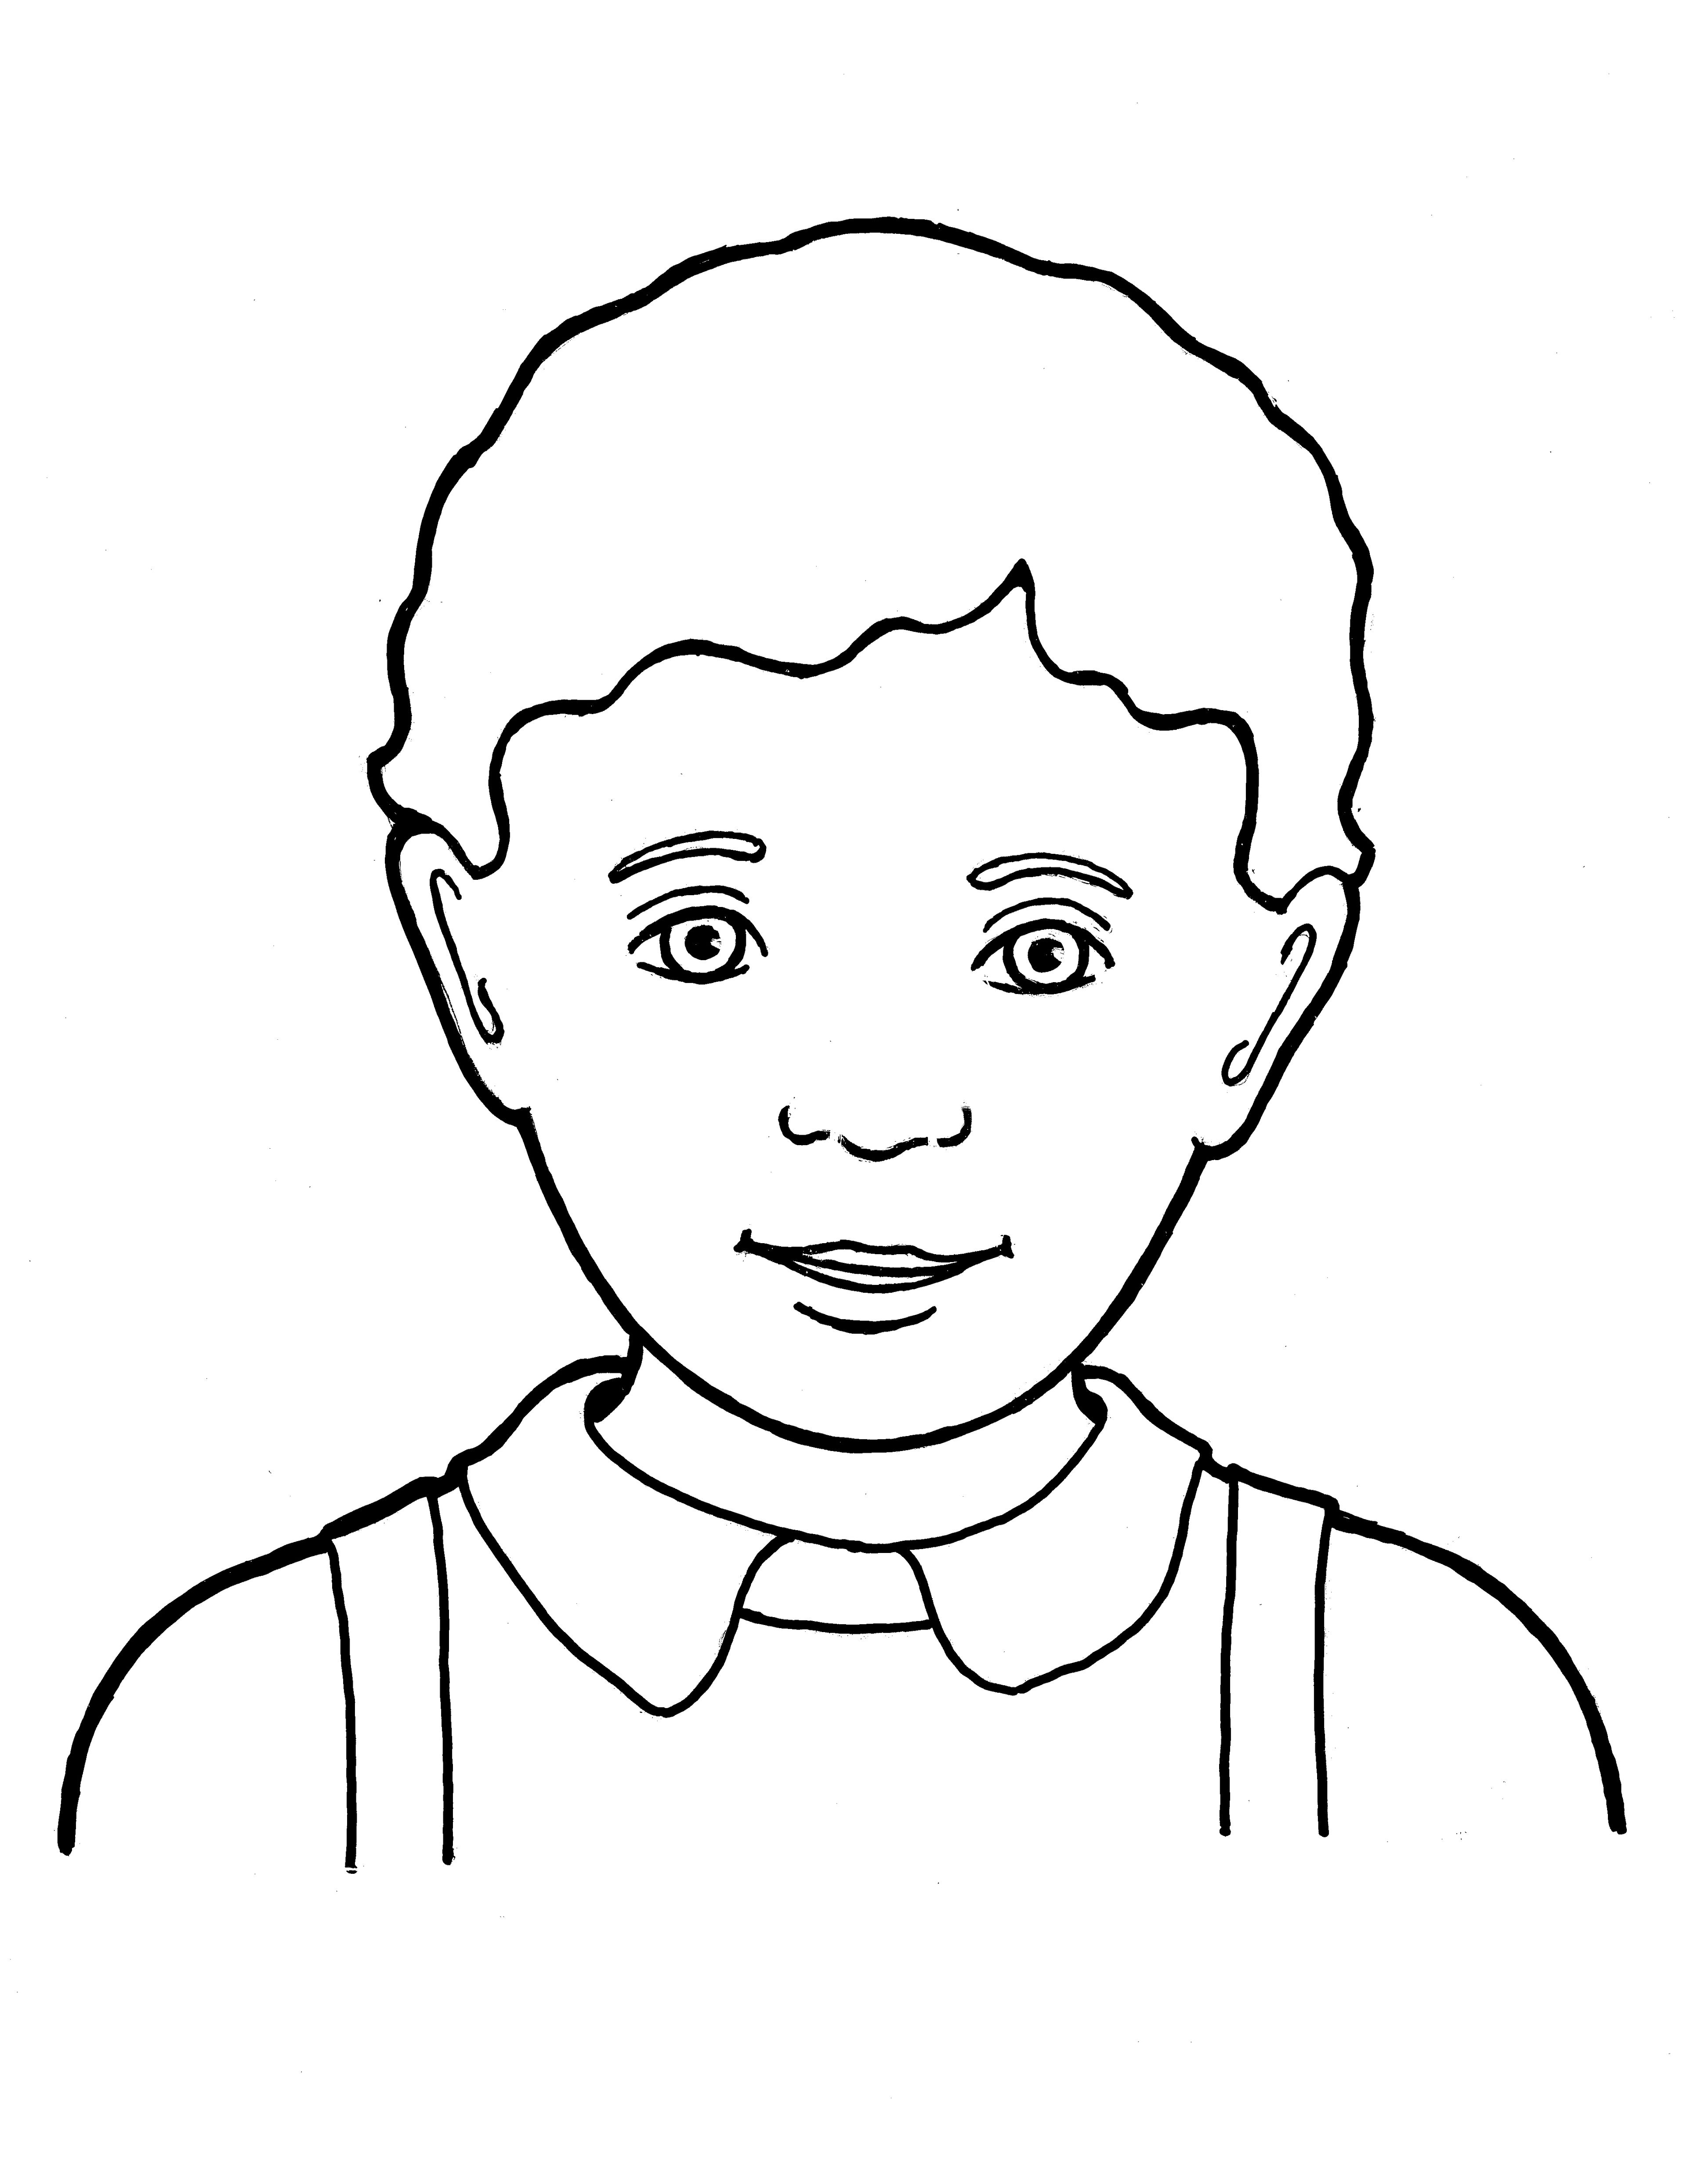 A line drawing of a Primary boy with suspenders, from the nursery manual Behold Your Little Ones (2008), page 71.